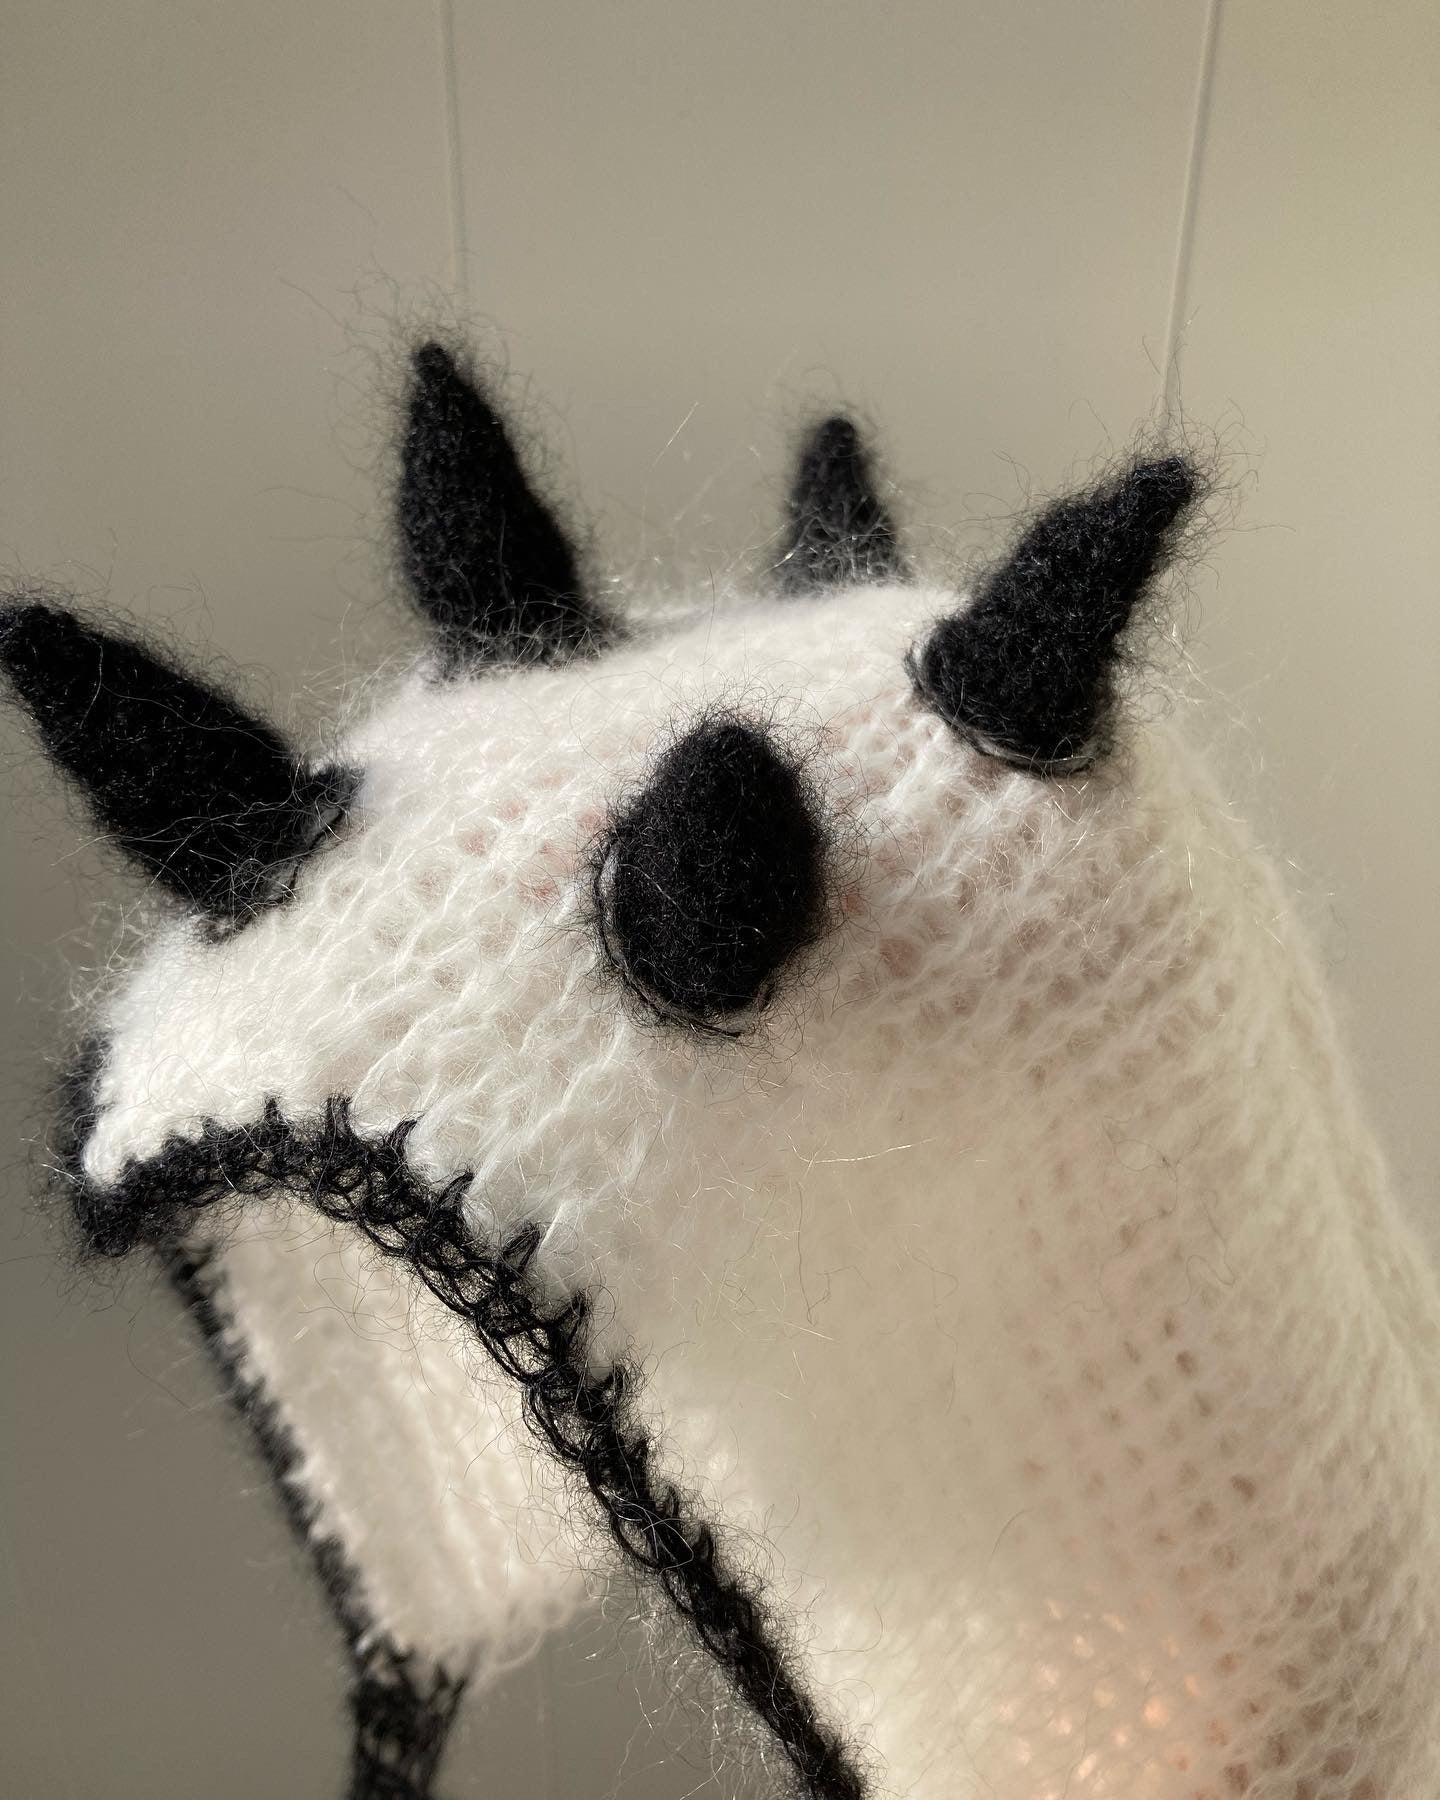 Black and white bonnet with the spikes.